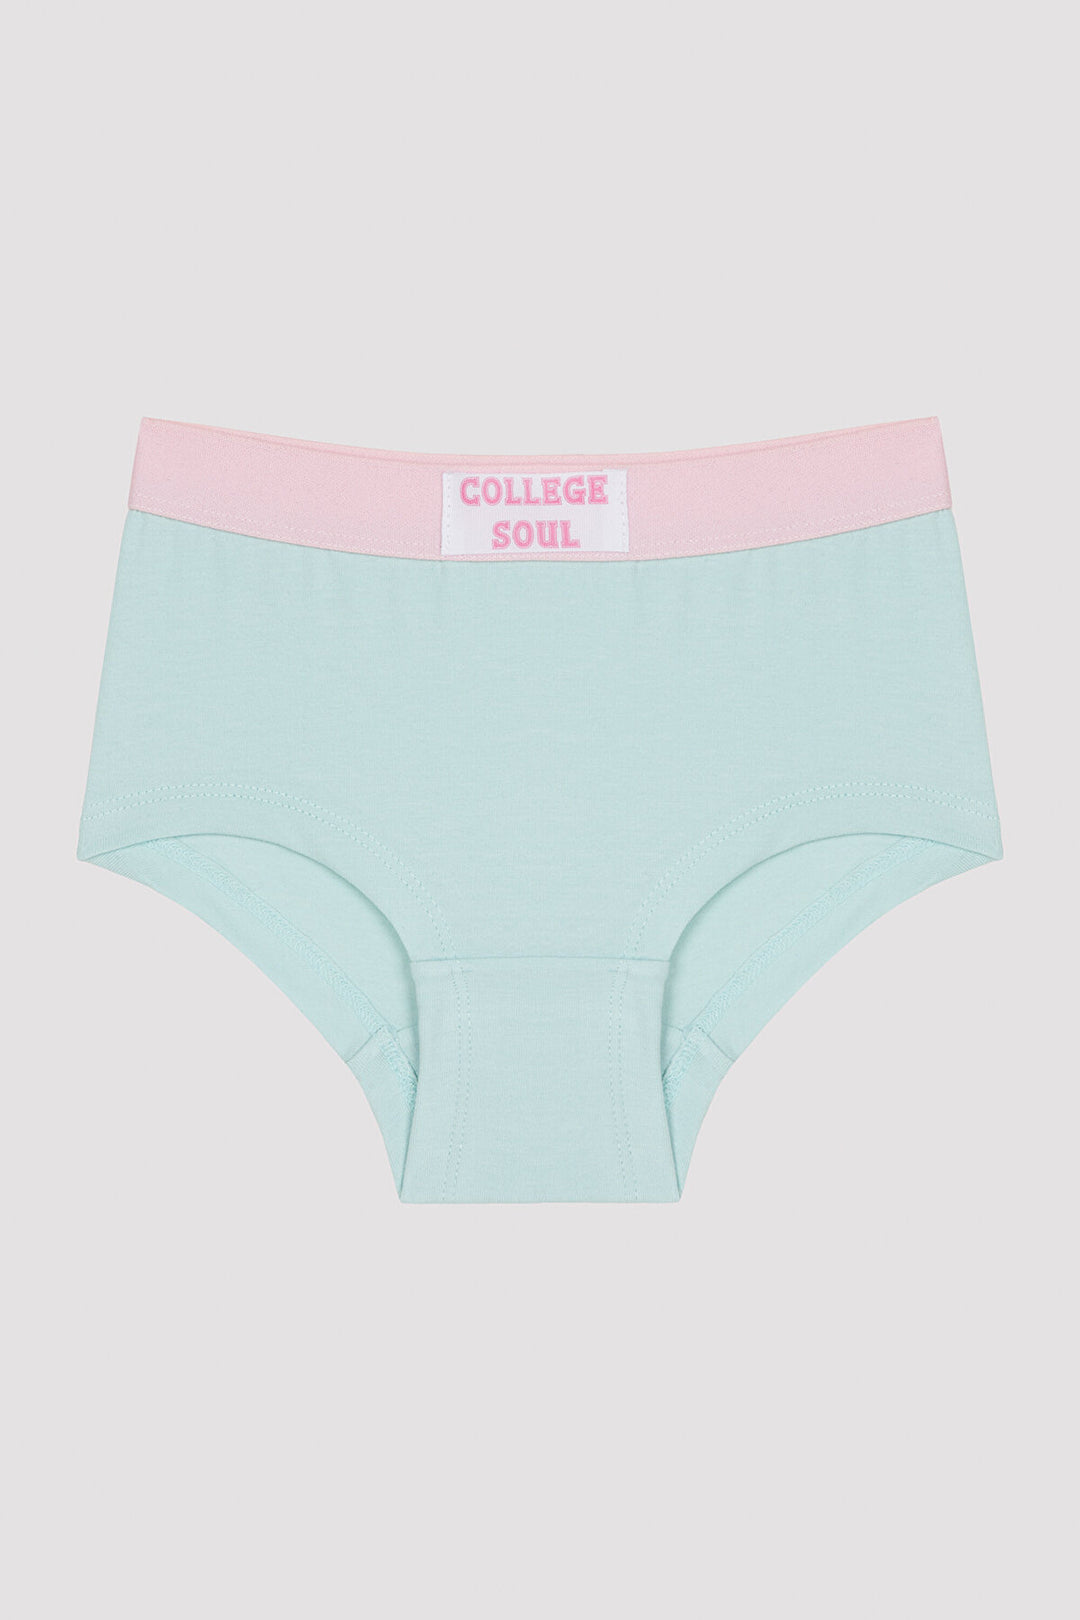 Girls College Soul 3 Pack Hipster